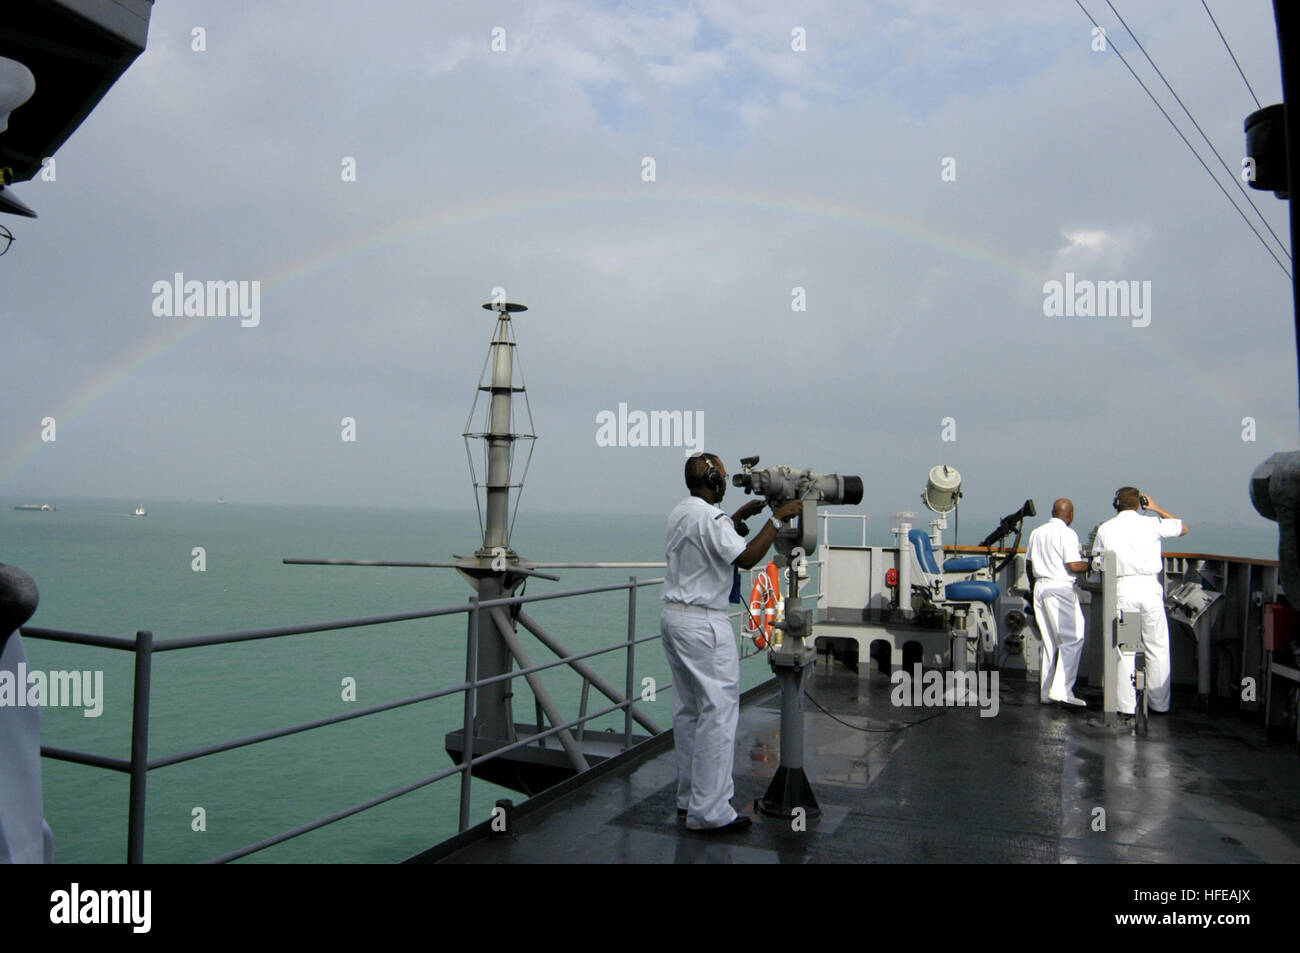 050307-N-4649C-031 Changi Naval Base, Singapore (Mar. 7, 2005) - A rainbow shines over the command ship USS Blue Ridge (LCC 19) as she pulls into Changi Naval Base, Singapore. Blue Ridge, the flagship of Commander, U.S. Seventh Fleet, is visiting Singapore during a routine port visit.  While in Singapore, the Yokosuka, Japan-based ship's approximately 1,000 Sailors, Marines, and staff personnel will enjoy recreational activities, participate in community service projects, and learn more about the Singapore culture.  U.S. Navy Photo by Photographer's Mate 2nd Class Chantel M. Clayton (RELEASED) Stock Photo